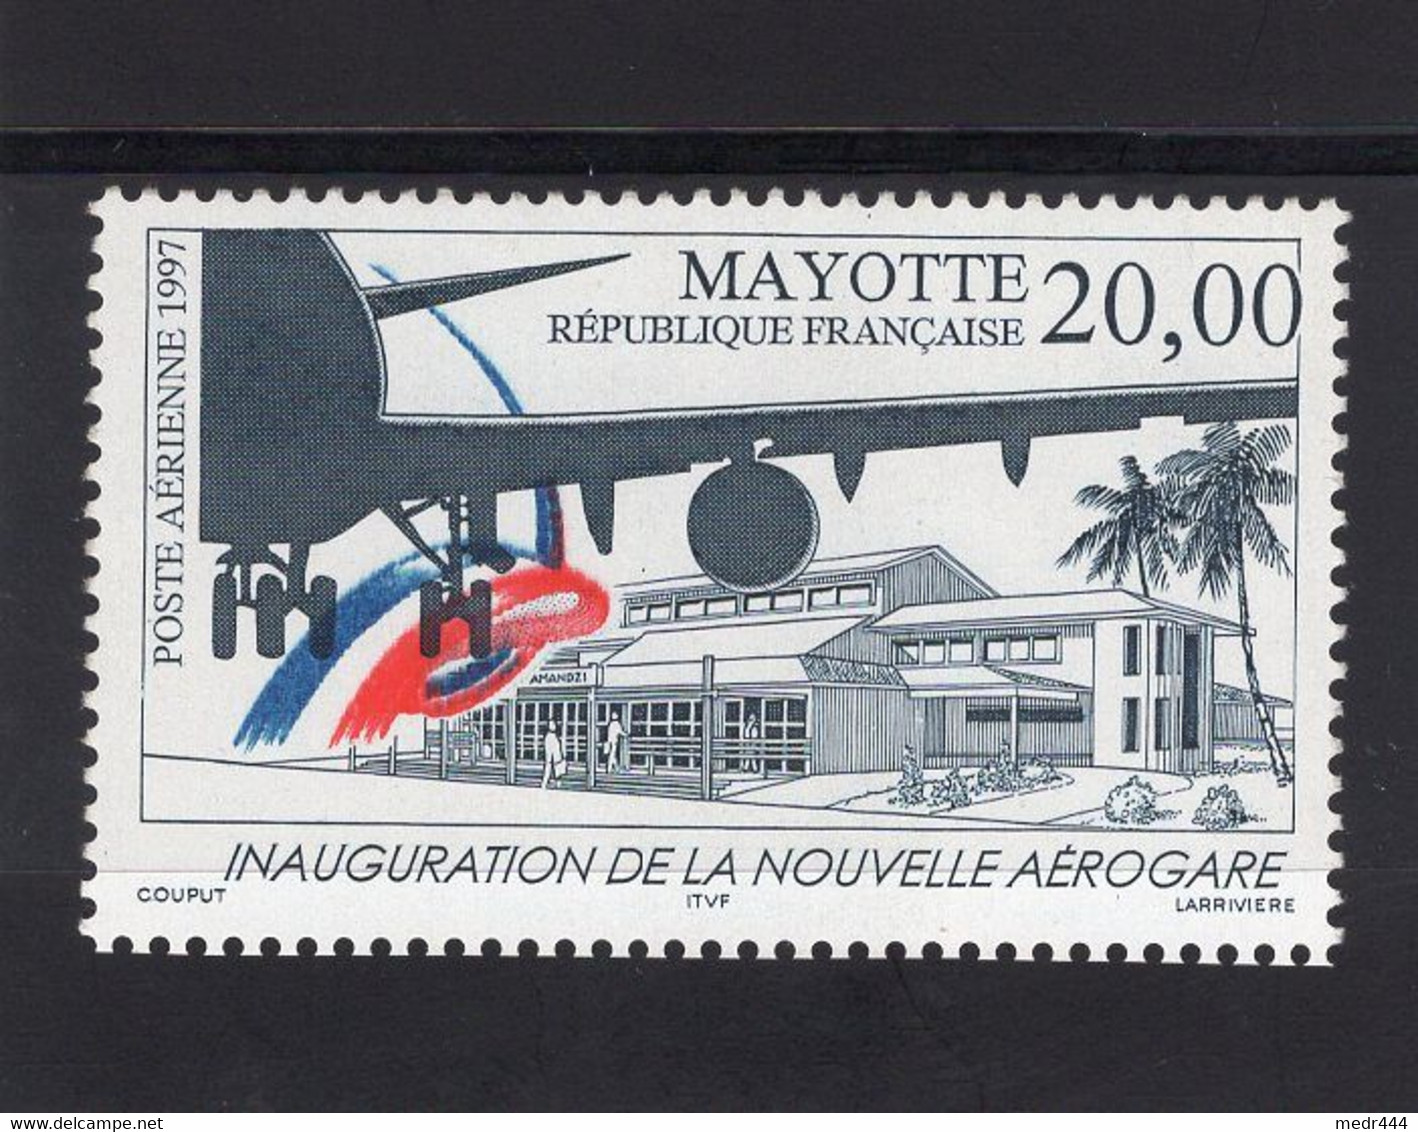 Mayotte 1997 - Airmail - Inauguration Of The New Airport - Stamp - Complete Set - MNH** Excellent Quality - Aéreo